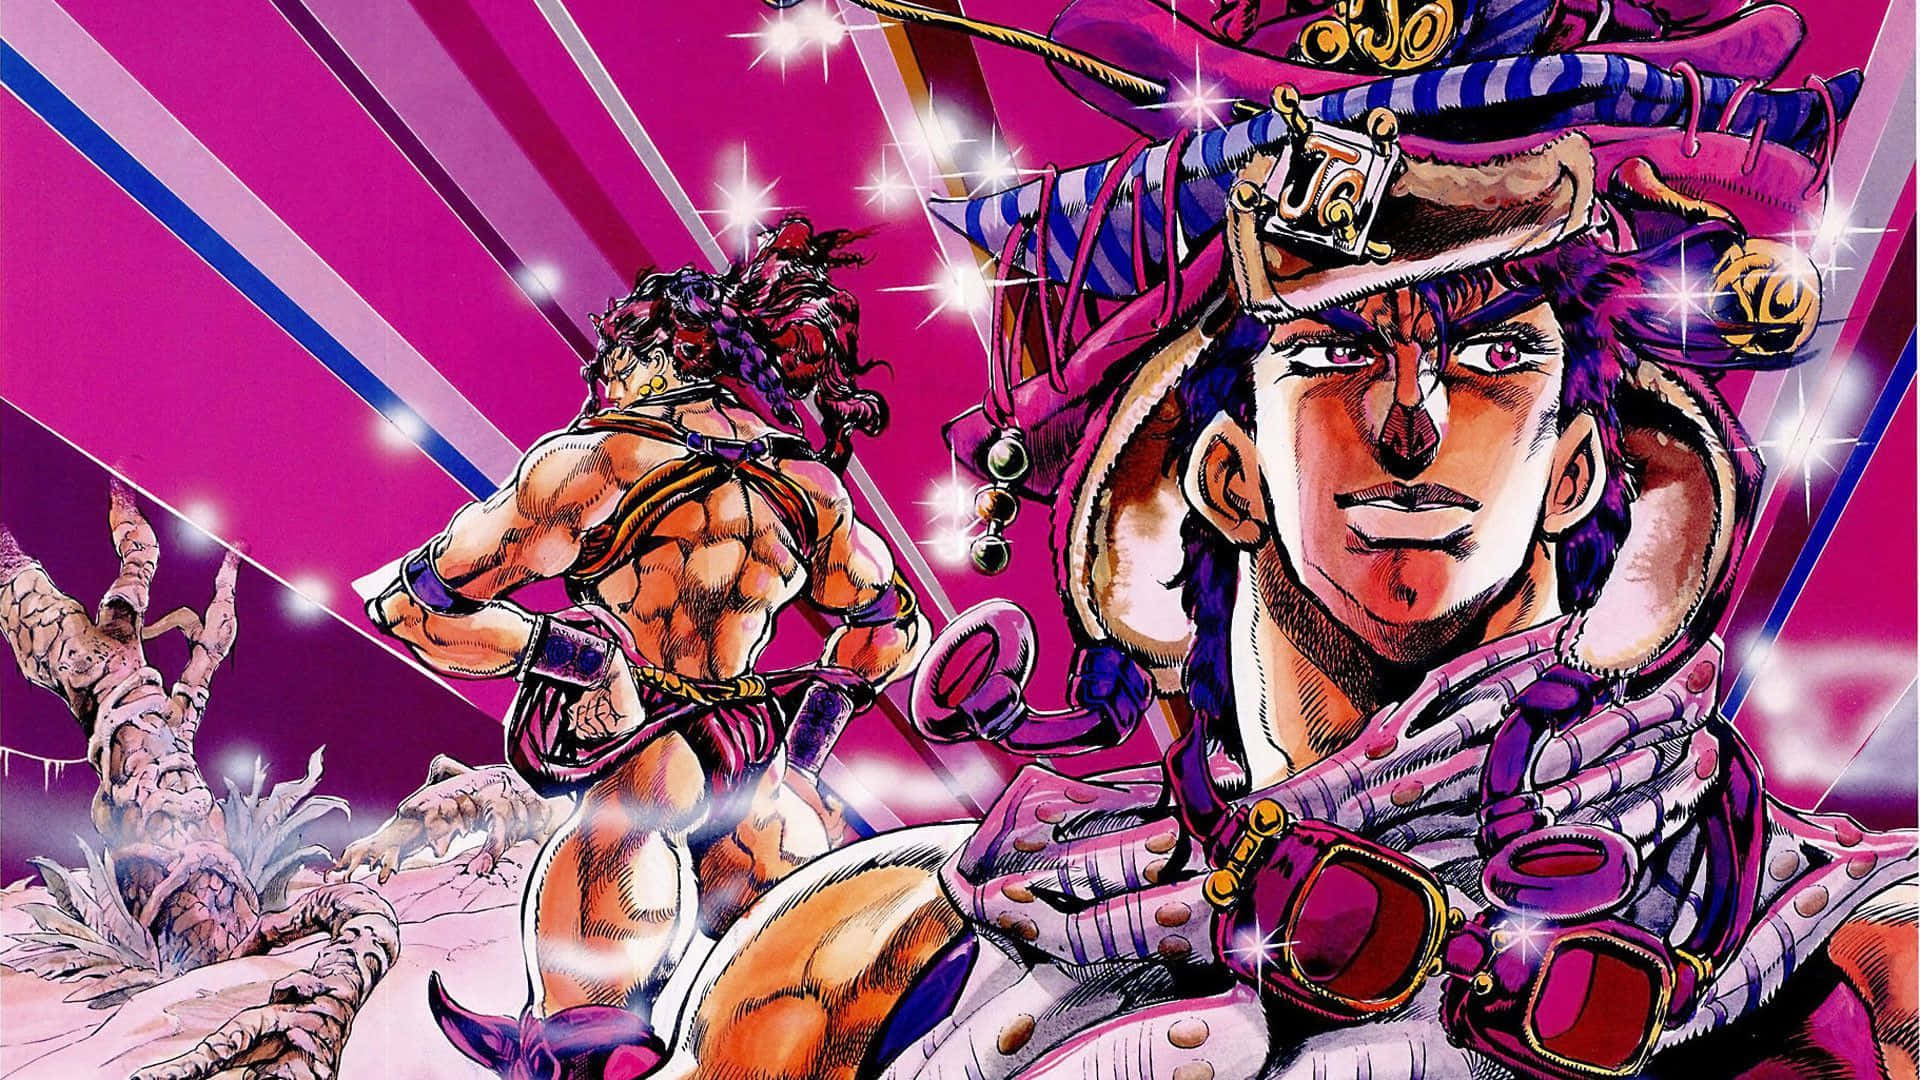 Intense action with Battle Tendency characters Wallpaper